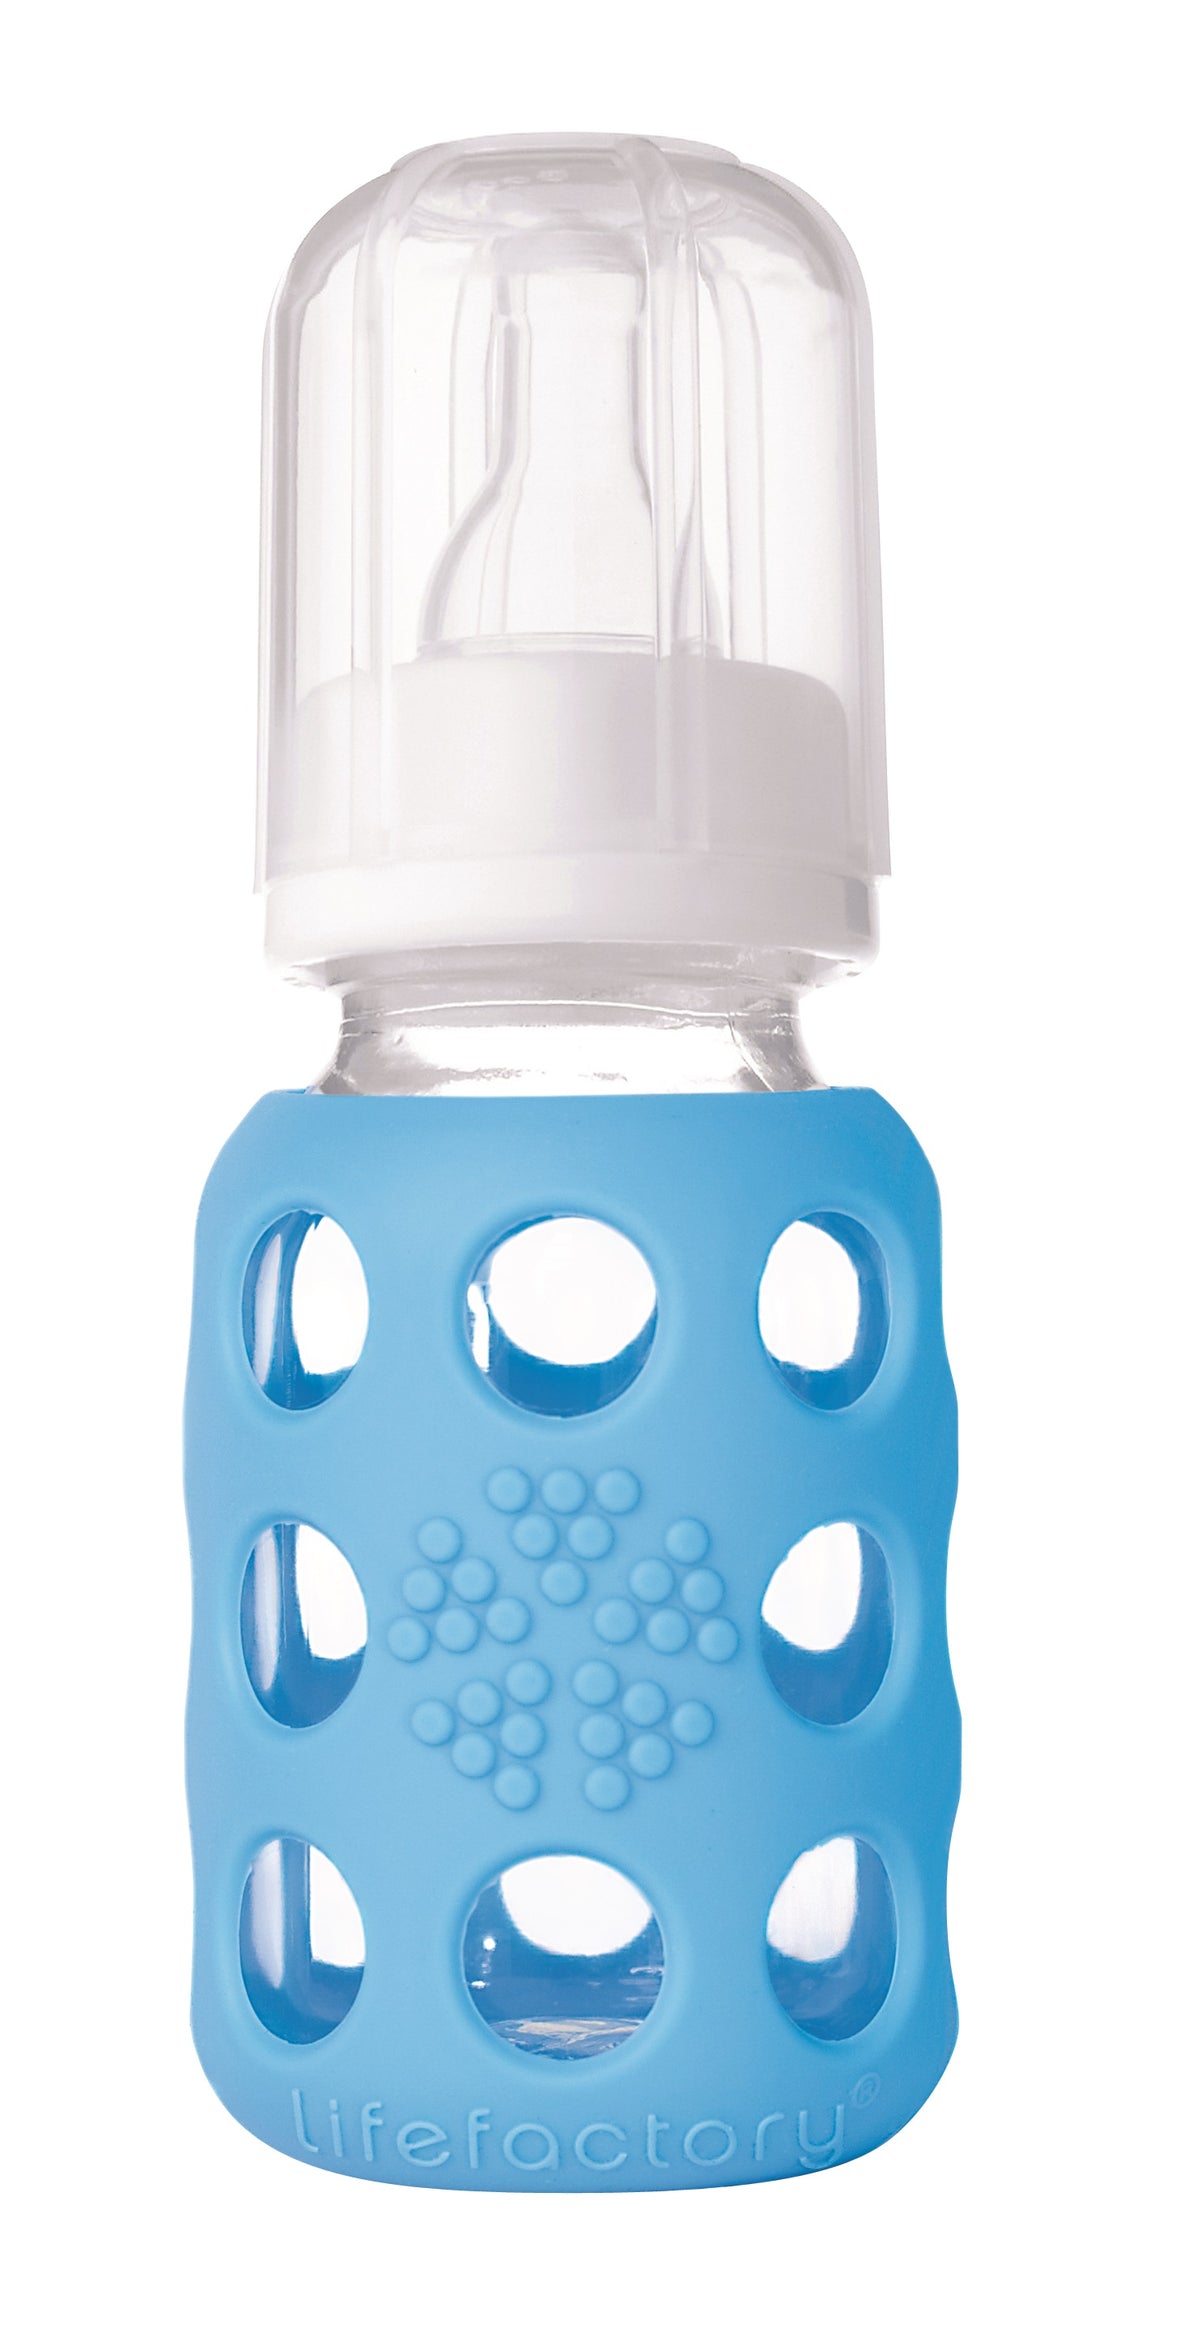 Lifefactory 110000 Baby Glass Water Bottle, Sky Blue,  4 Oz